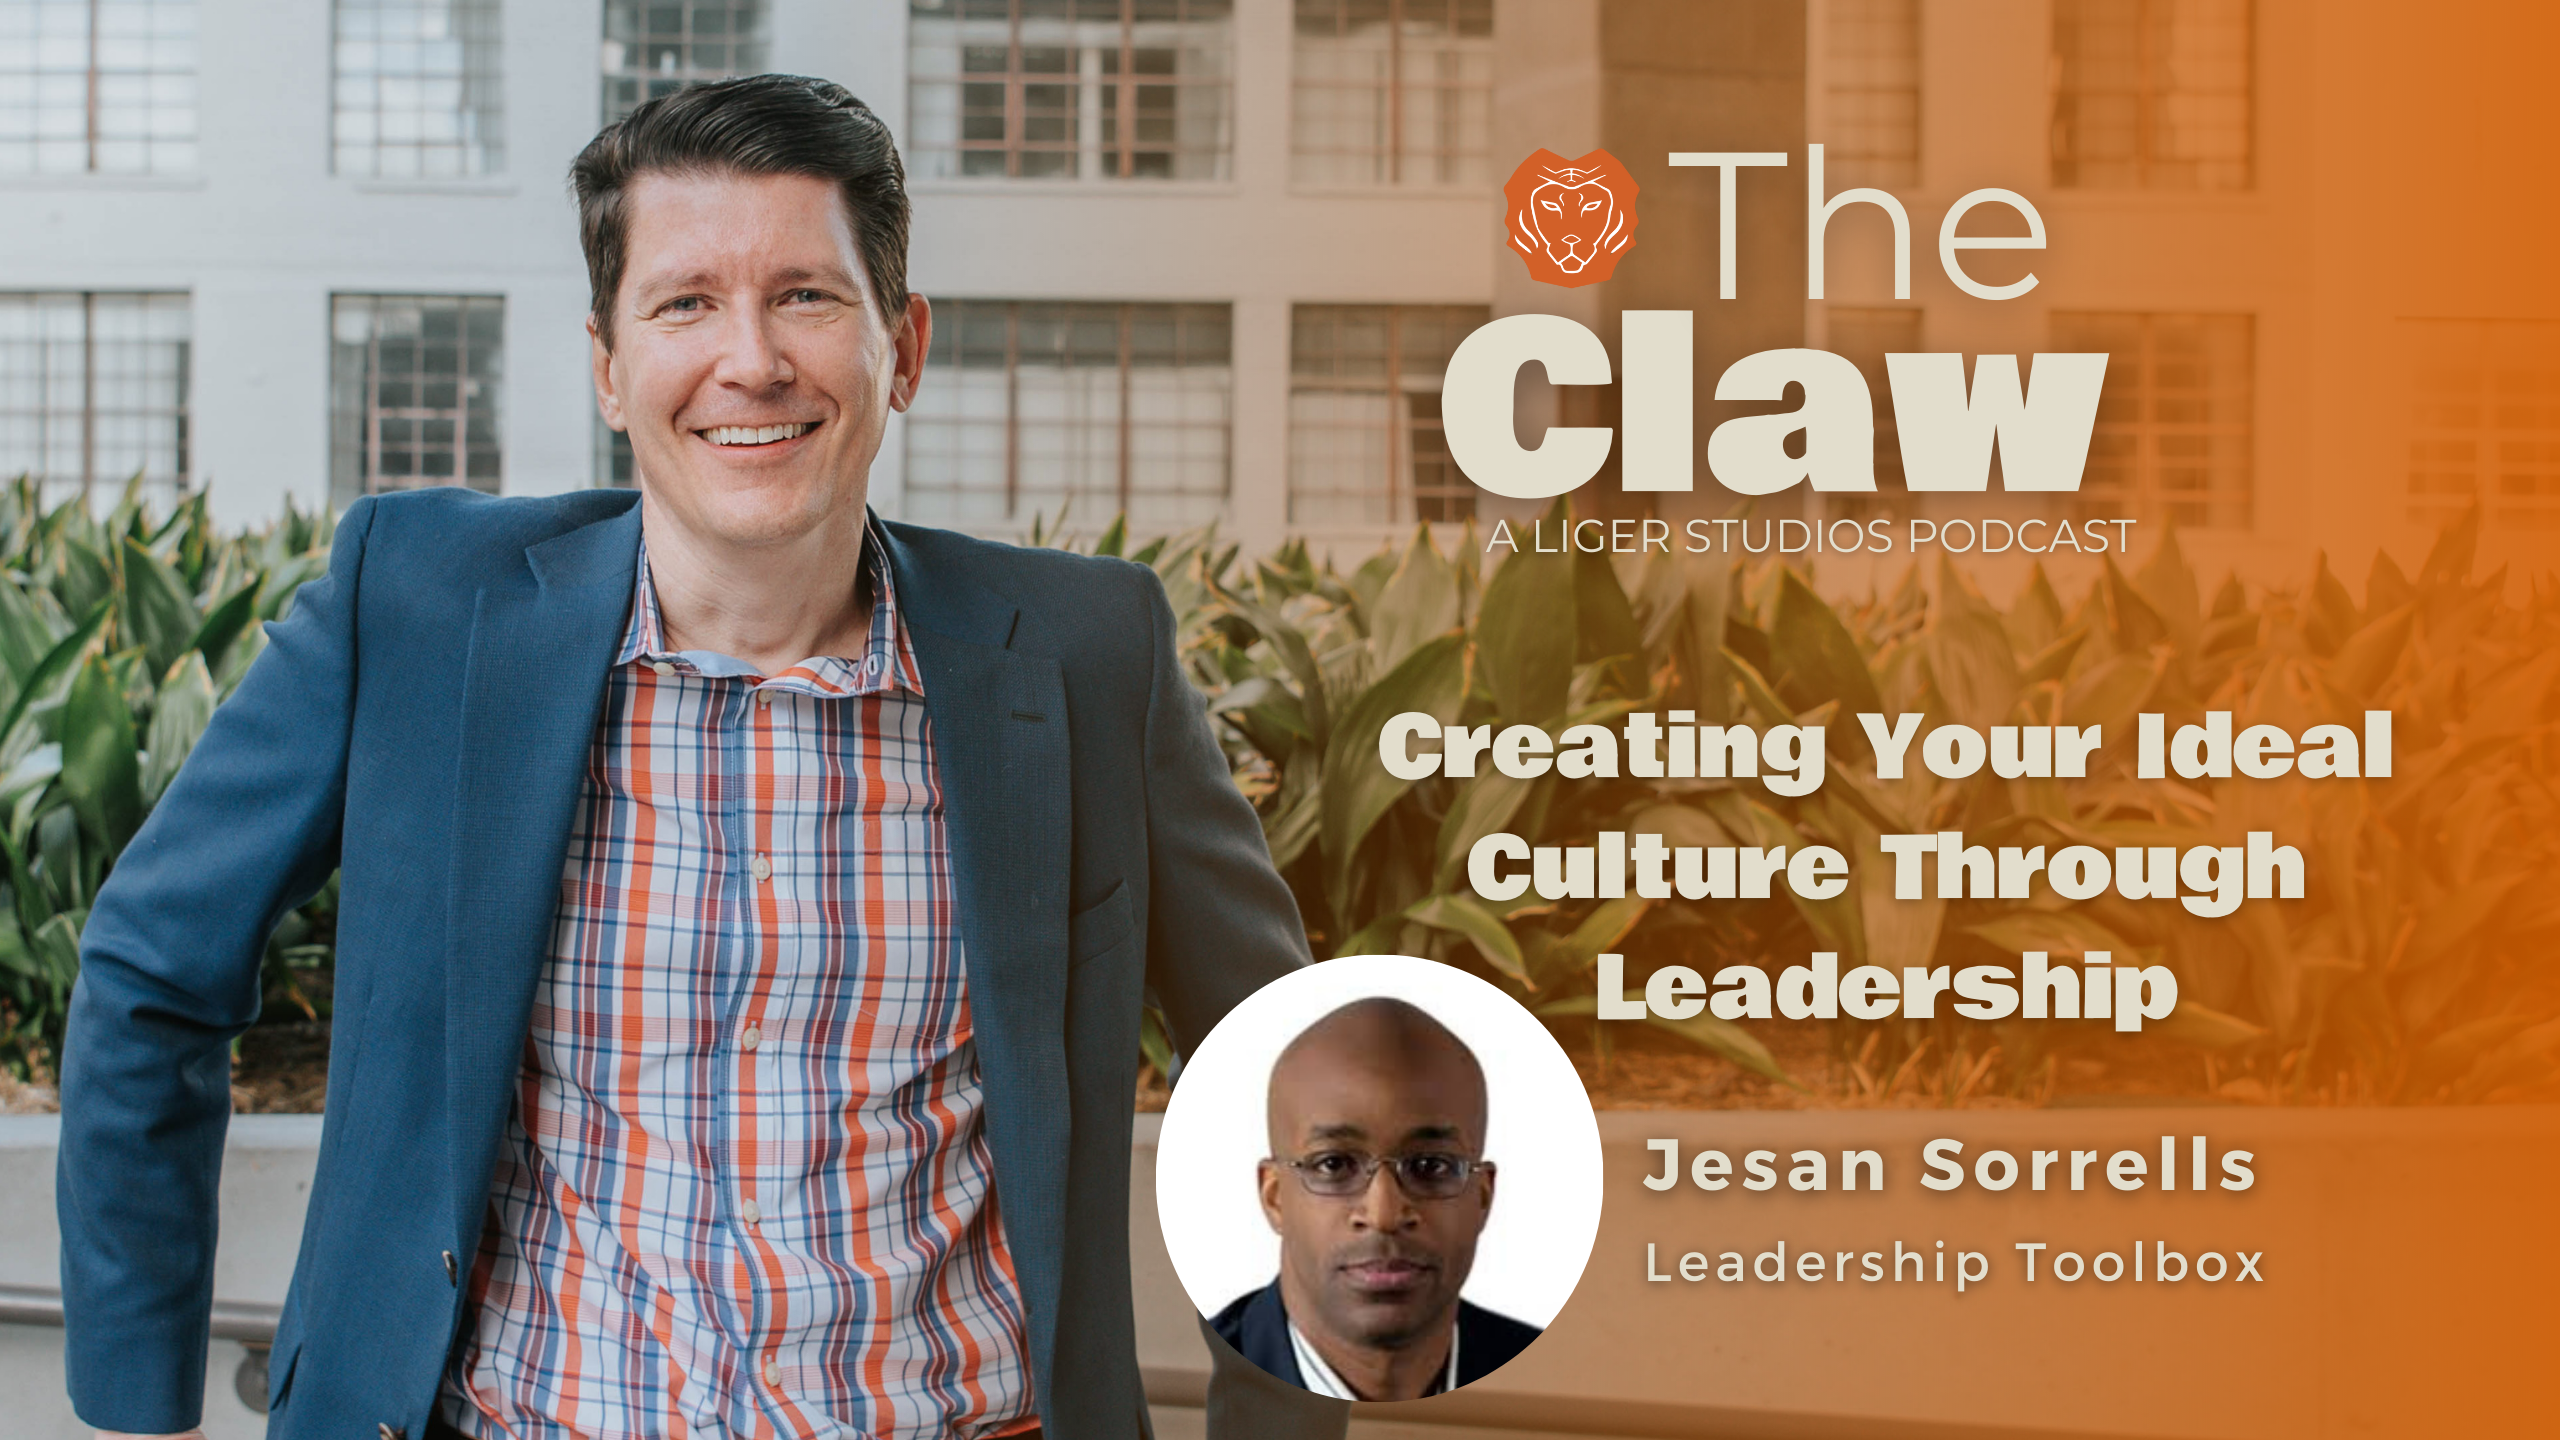 The Claw Podcast: Creating Your Ideal Culture Through Leadership with Jesan Sorrells